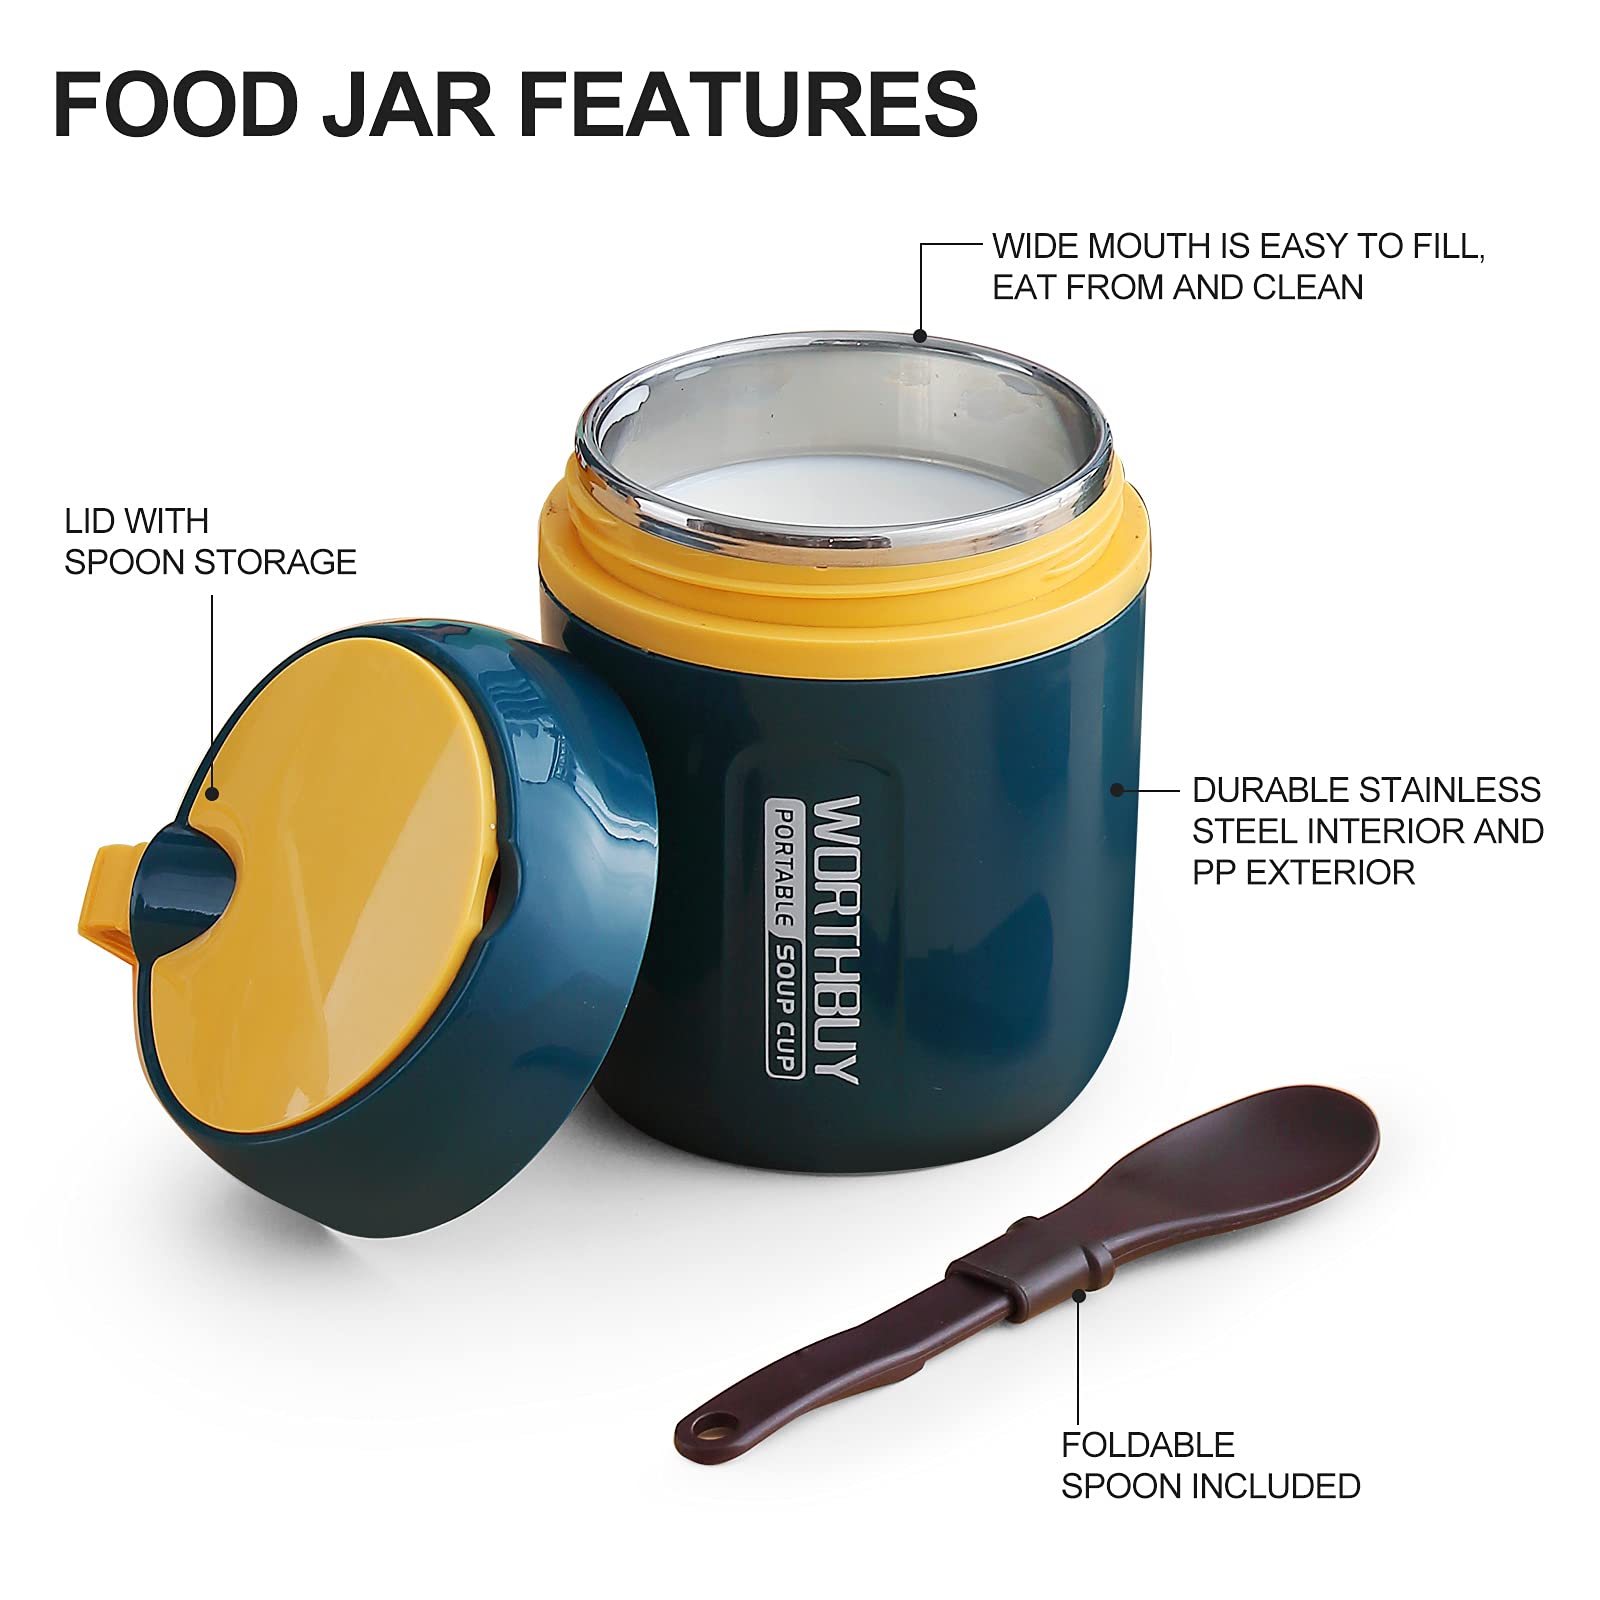 WORTHBUY Leak Proof Thermal Insulated Food Jar with Foldable Spoon, Lunch Containers Soup Cup for Kids and Adult, 16oz Capacity - Blue